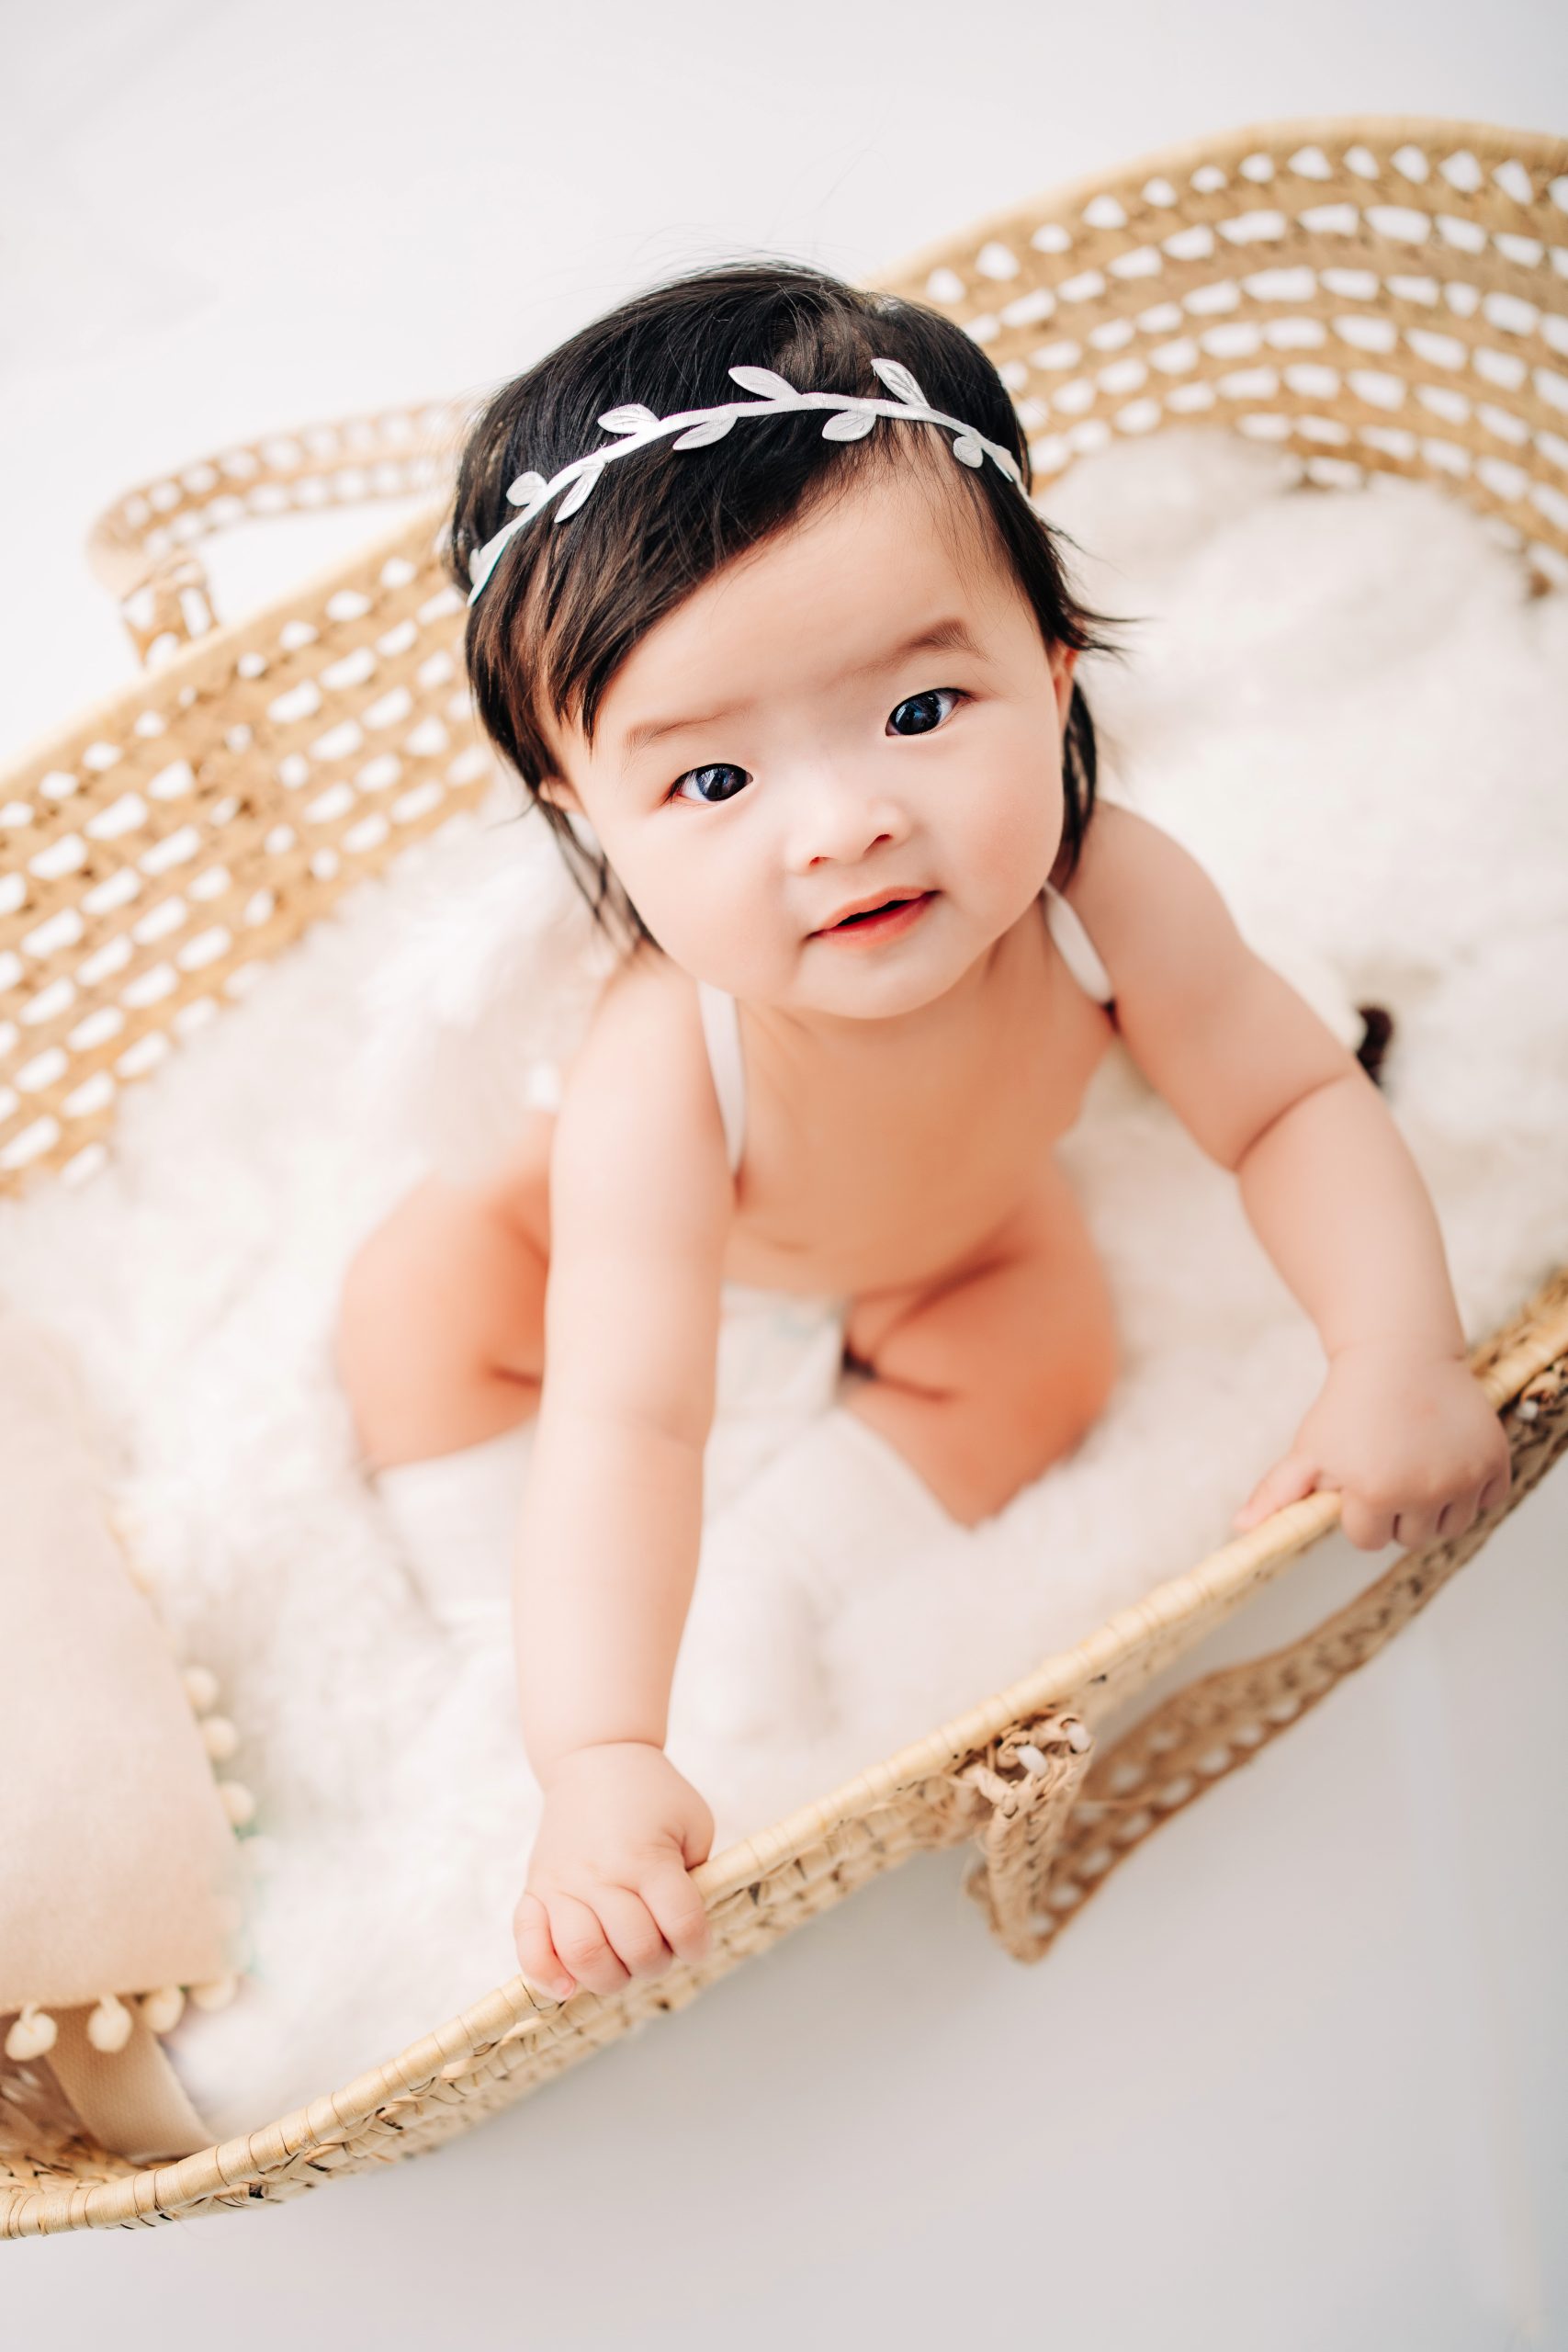 Baby girl in a basinet looking up